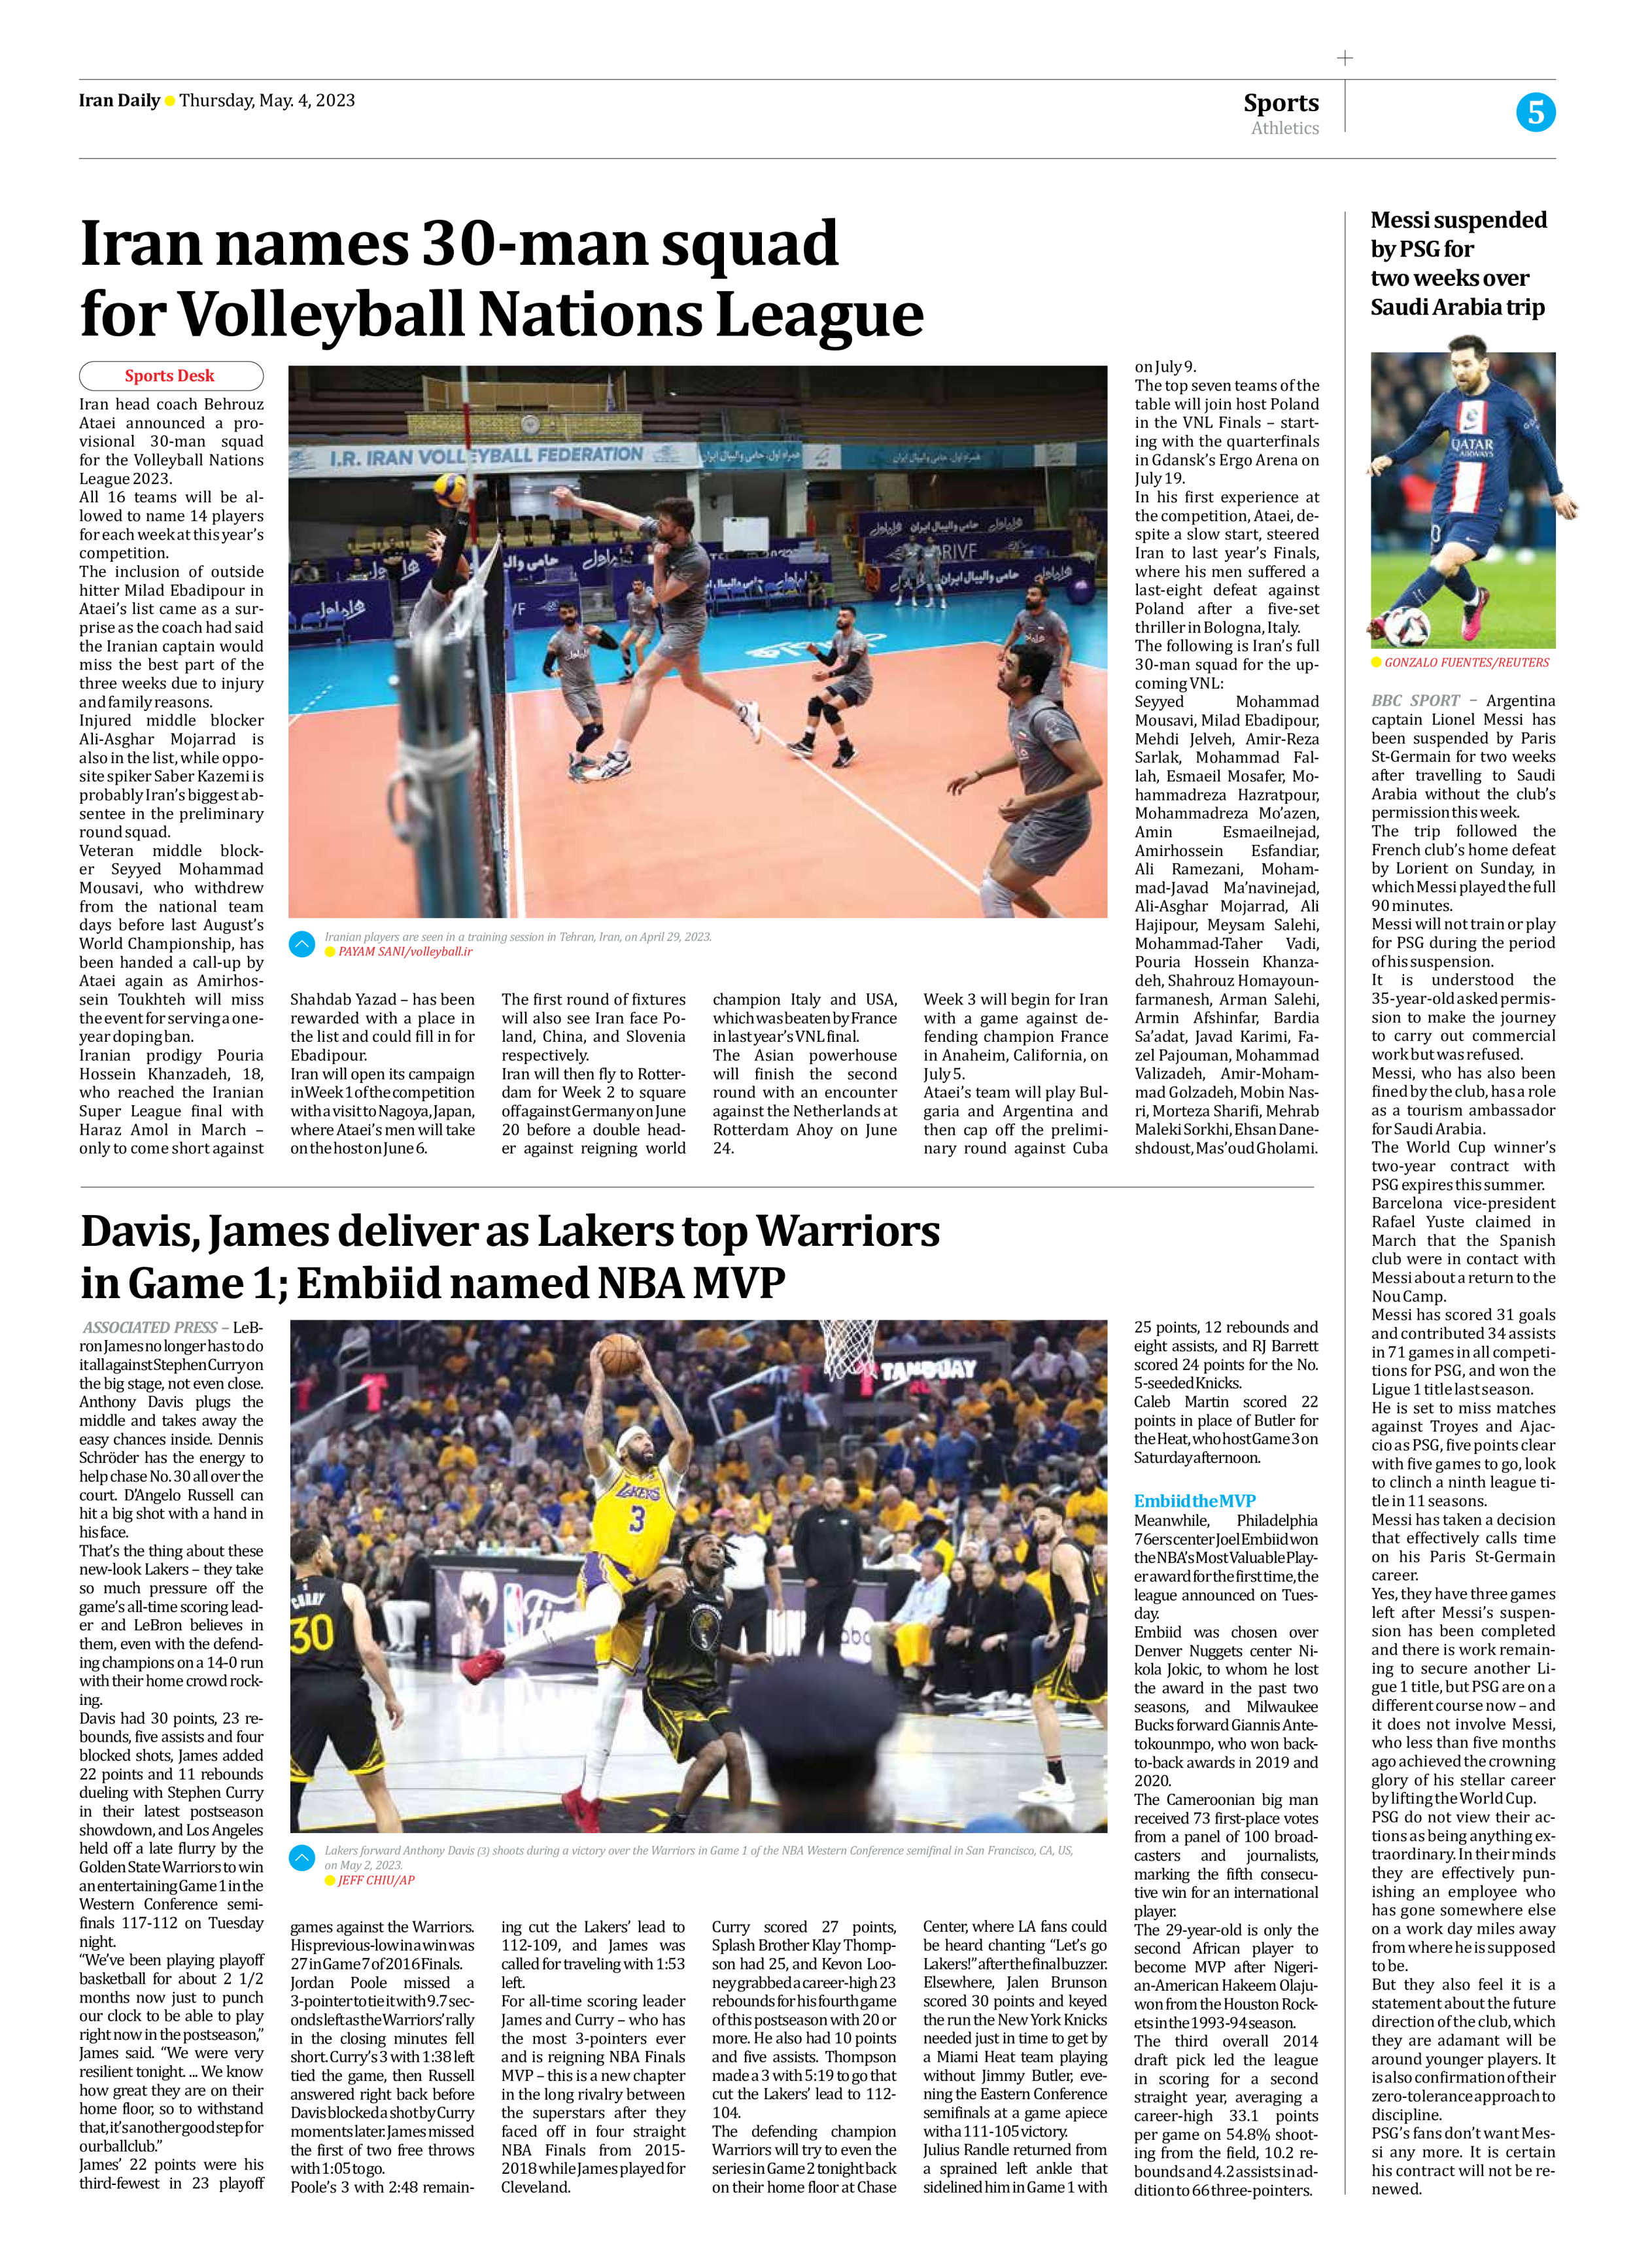 Iran Daily - Number Seven Thousand Two Hundred and Eighty Three - 04 May 2023 - Page 5